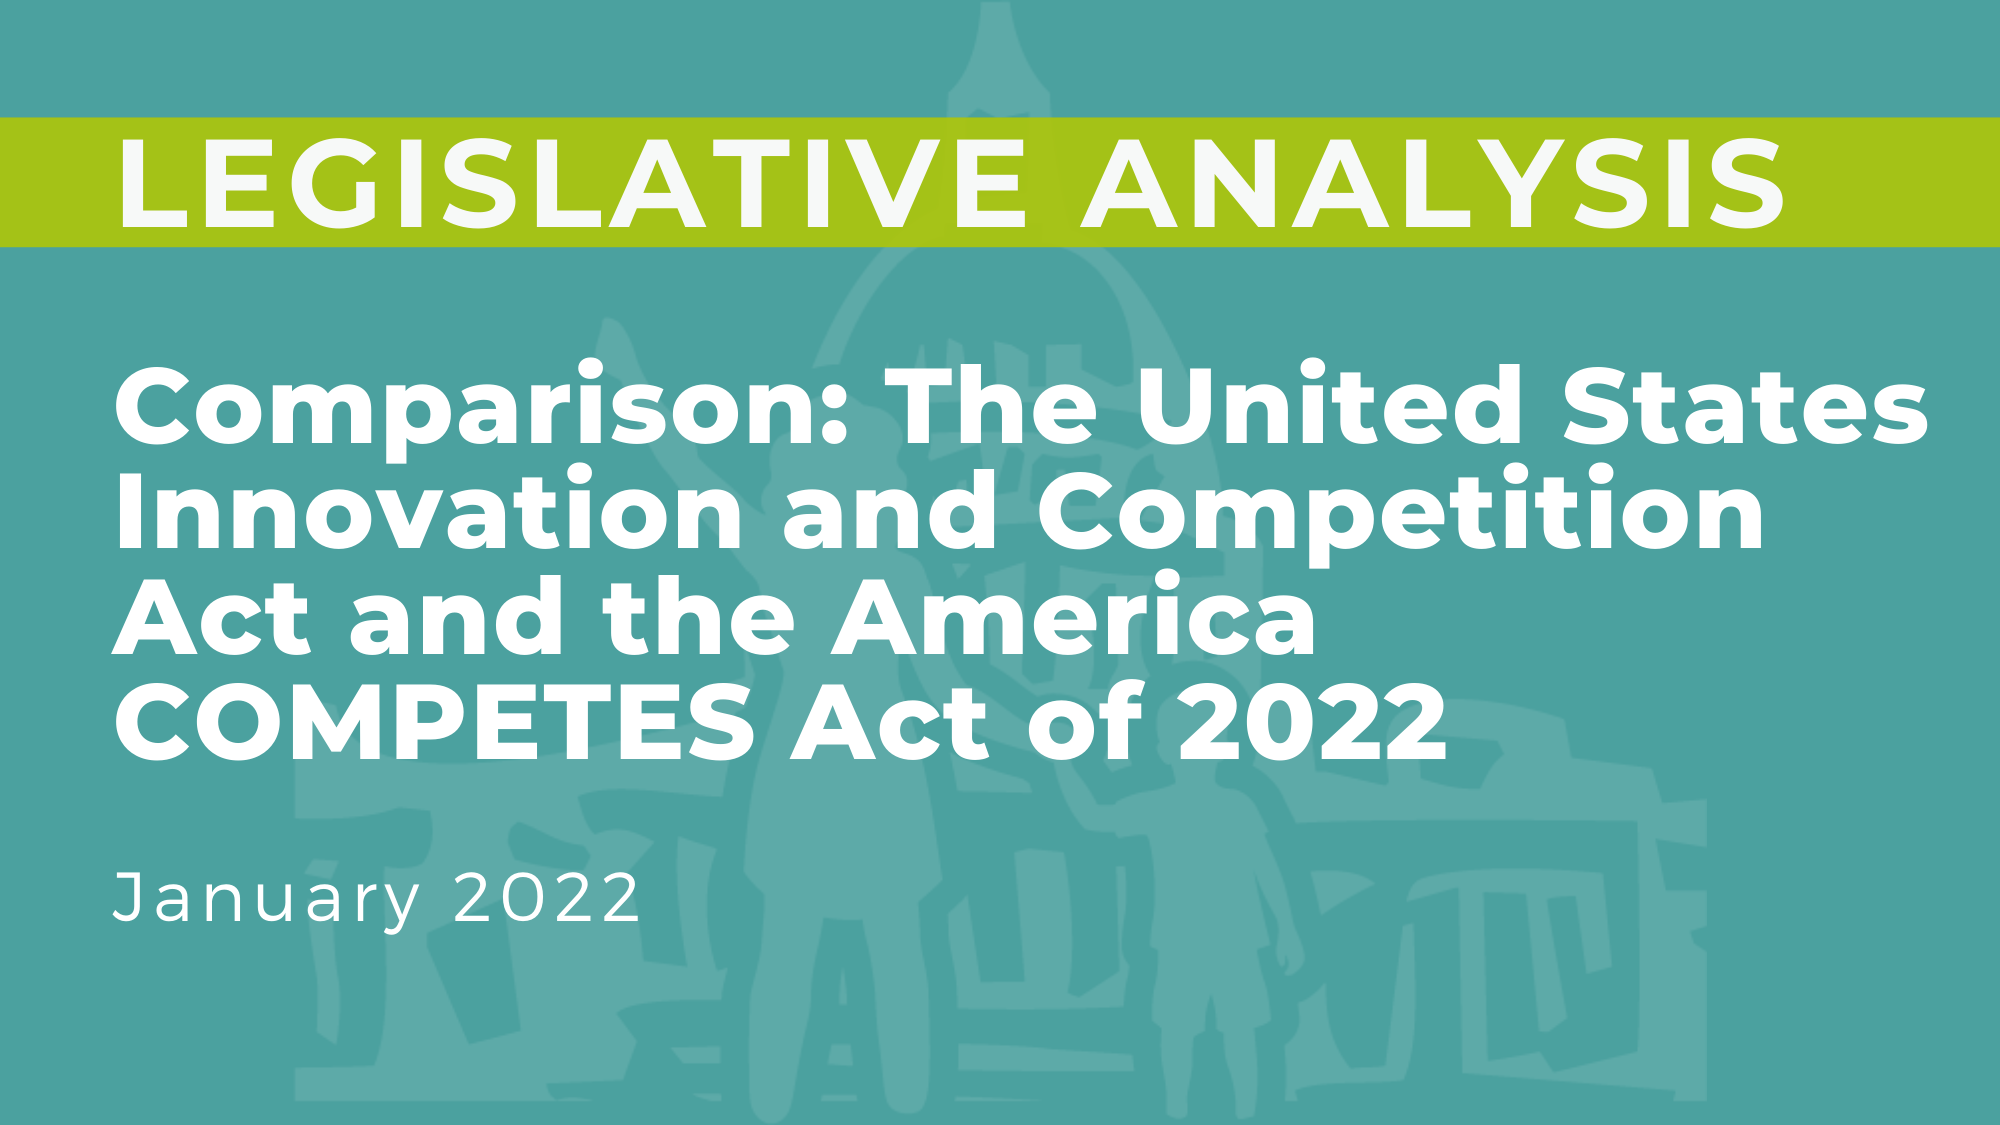 Comparison: The United States Innovation and Competition Act and the America COMPETES Act of 2022